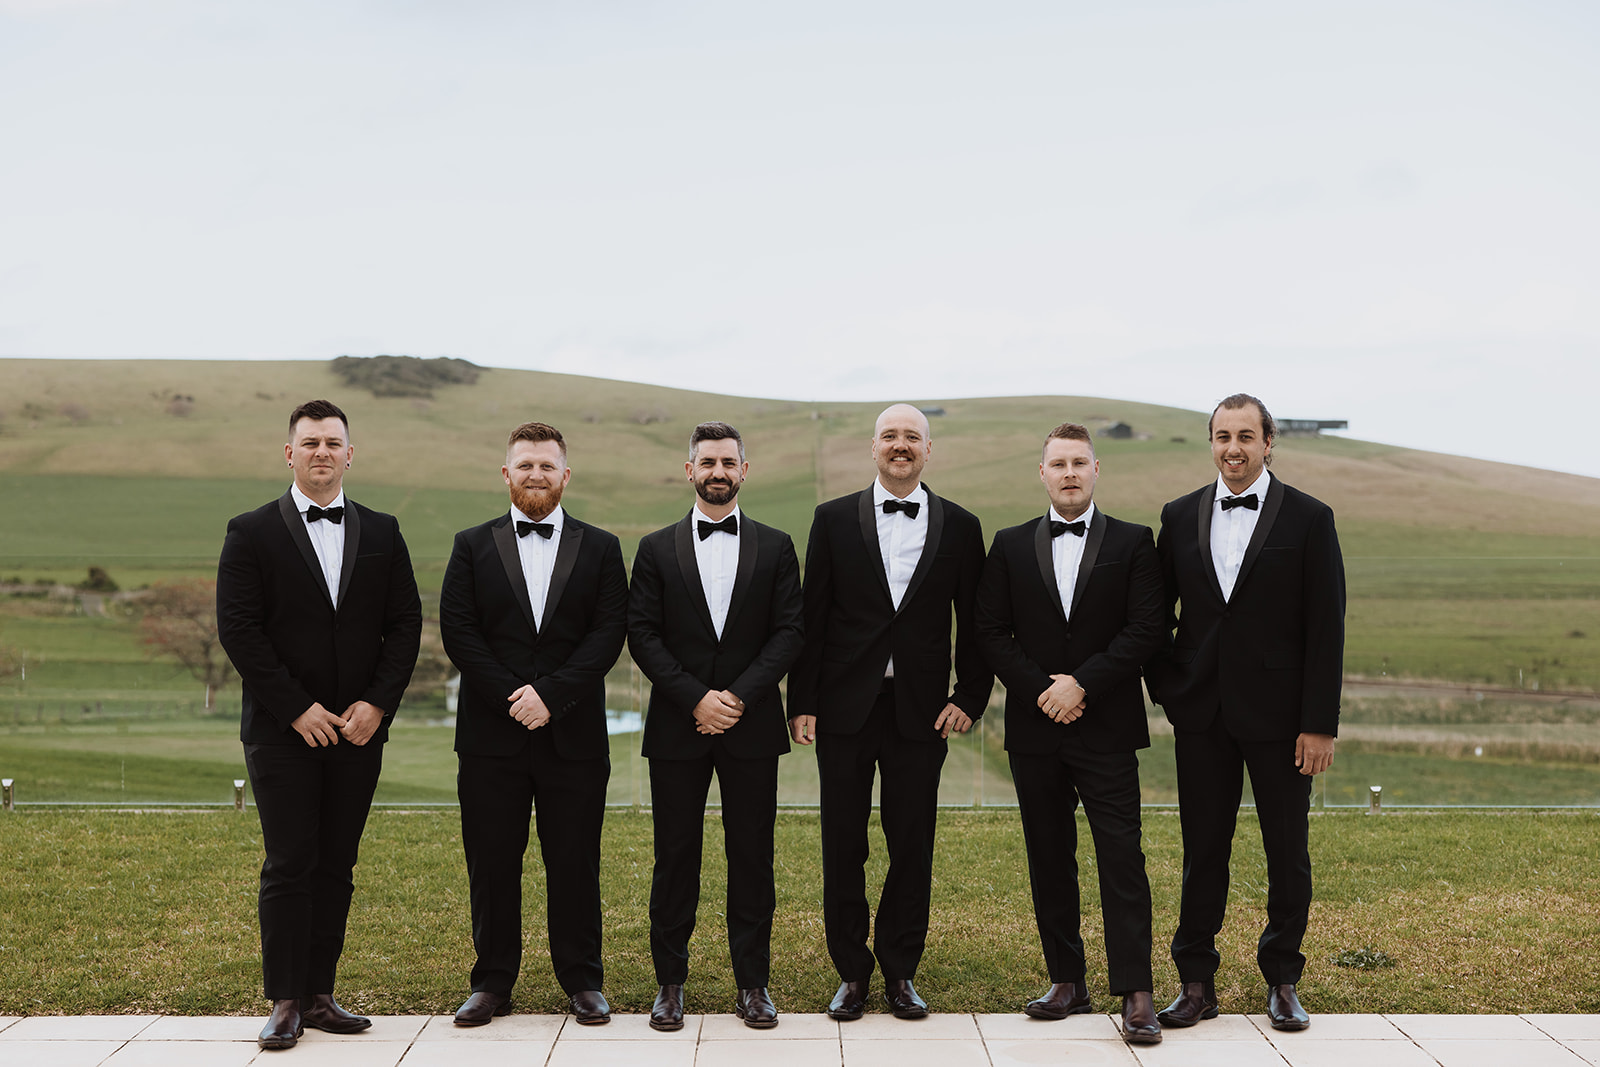 Groom together with his groomsmen wearing black suits